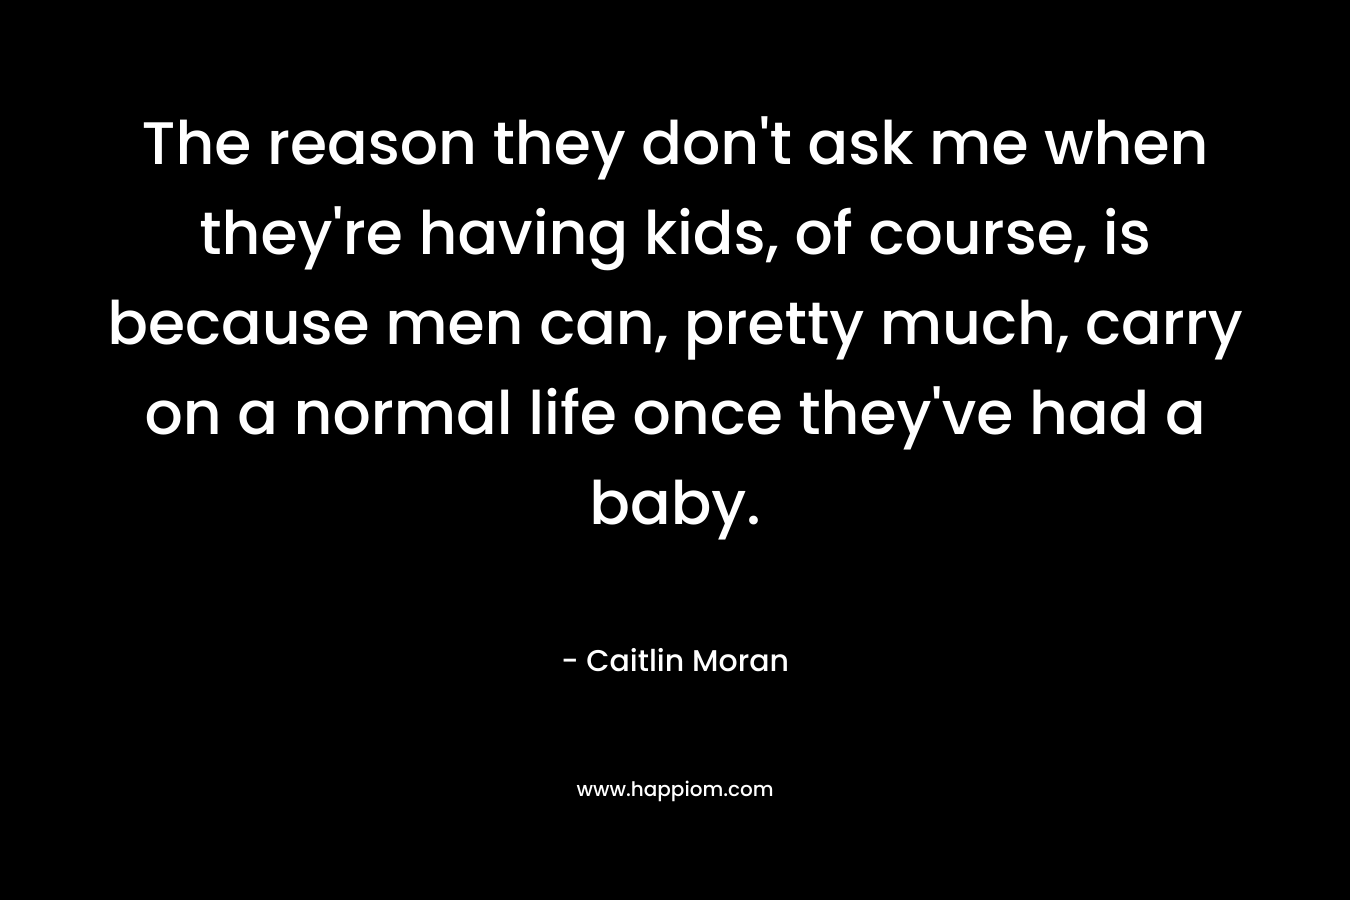 The reason they don't ask me when they're having kids, of course, is because men can, pretty much, carry on a normal life once they've had a baby.